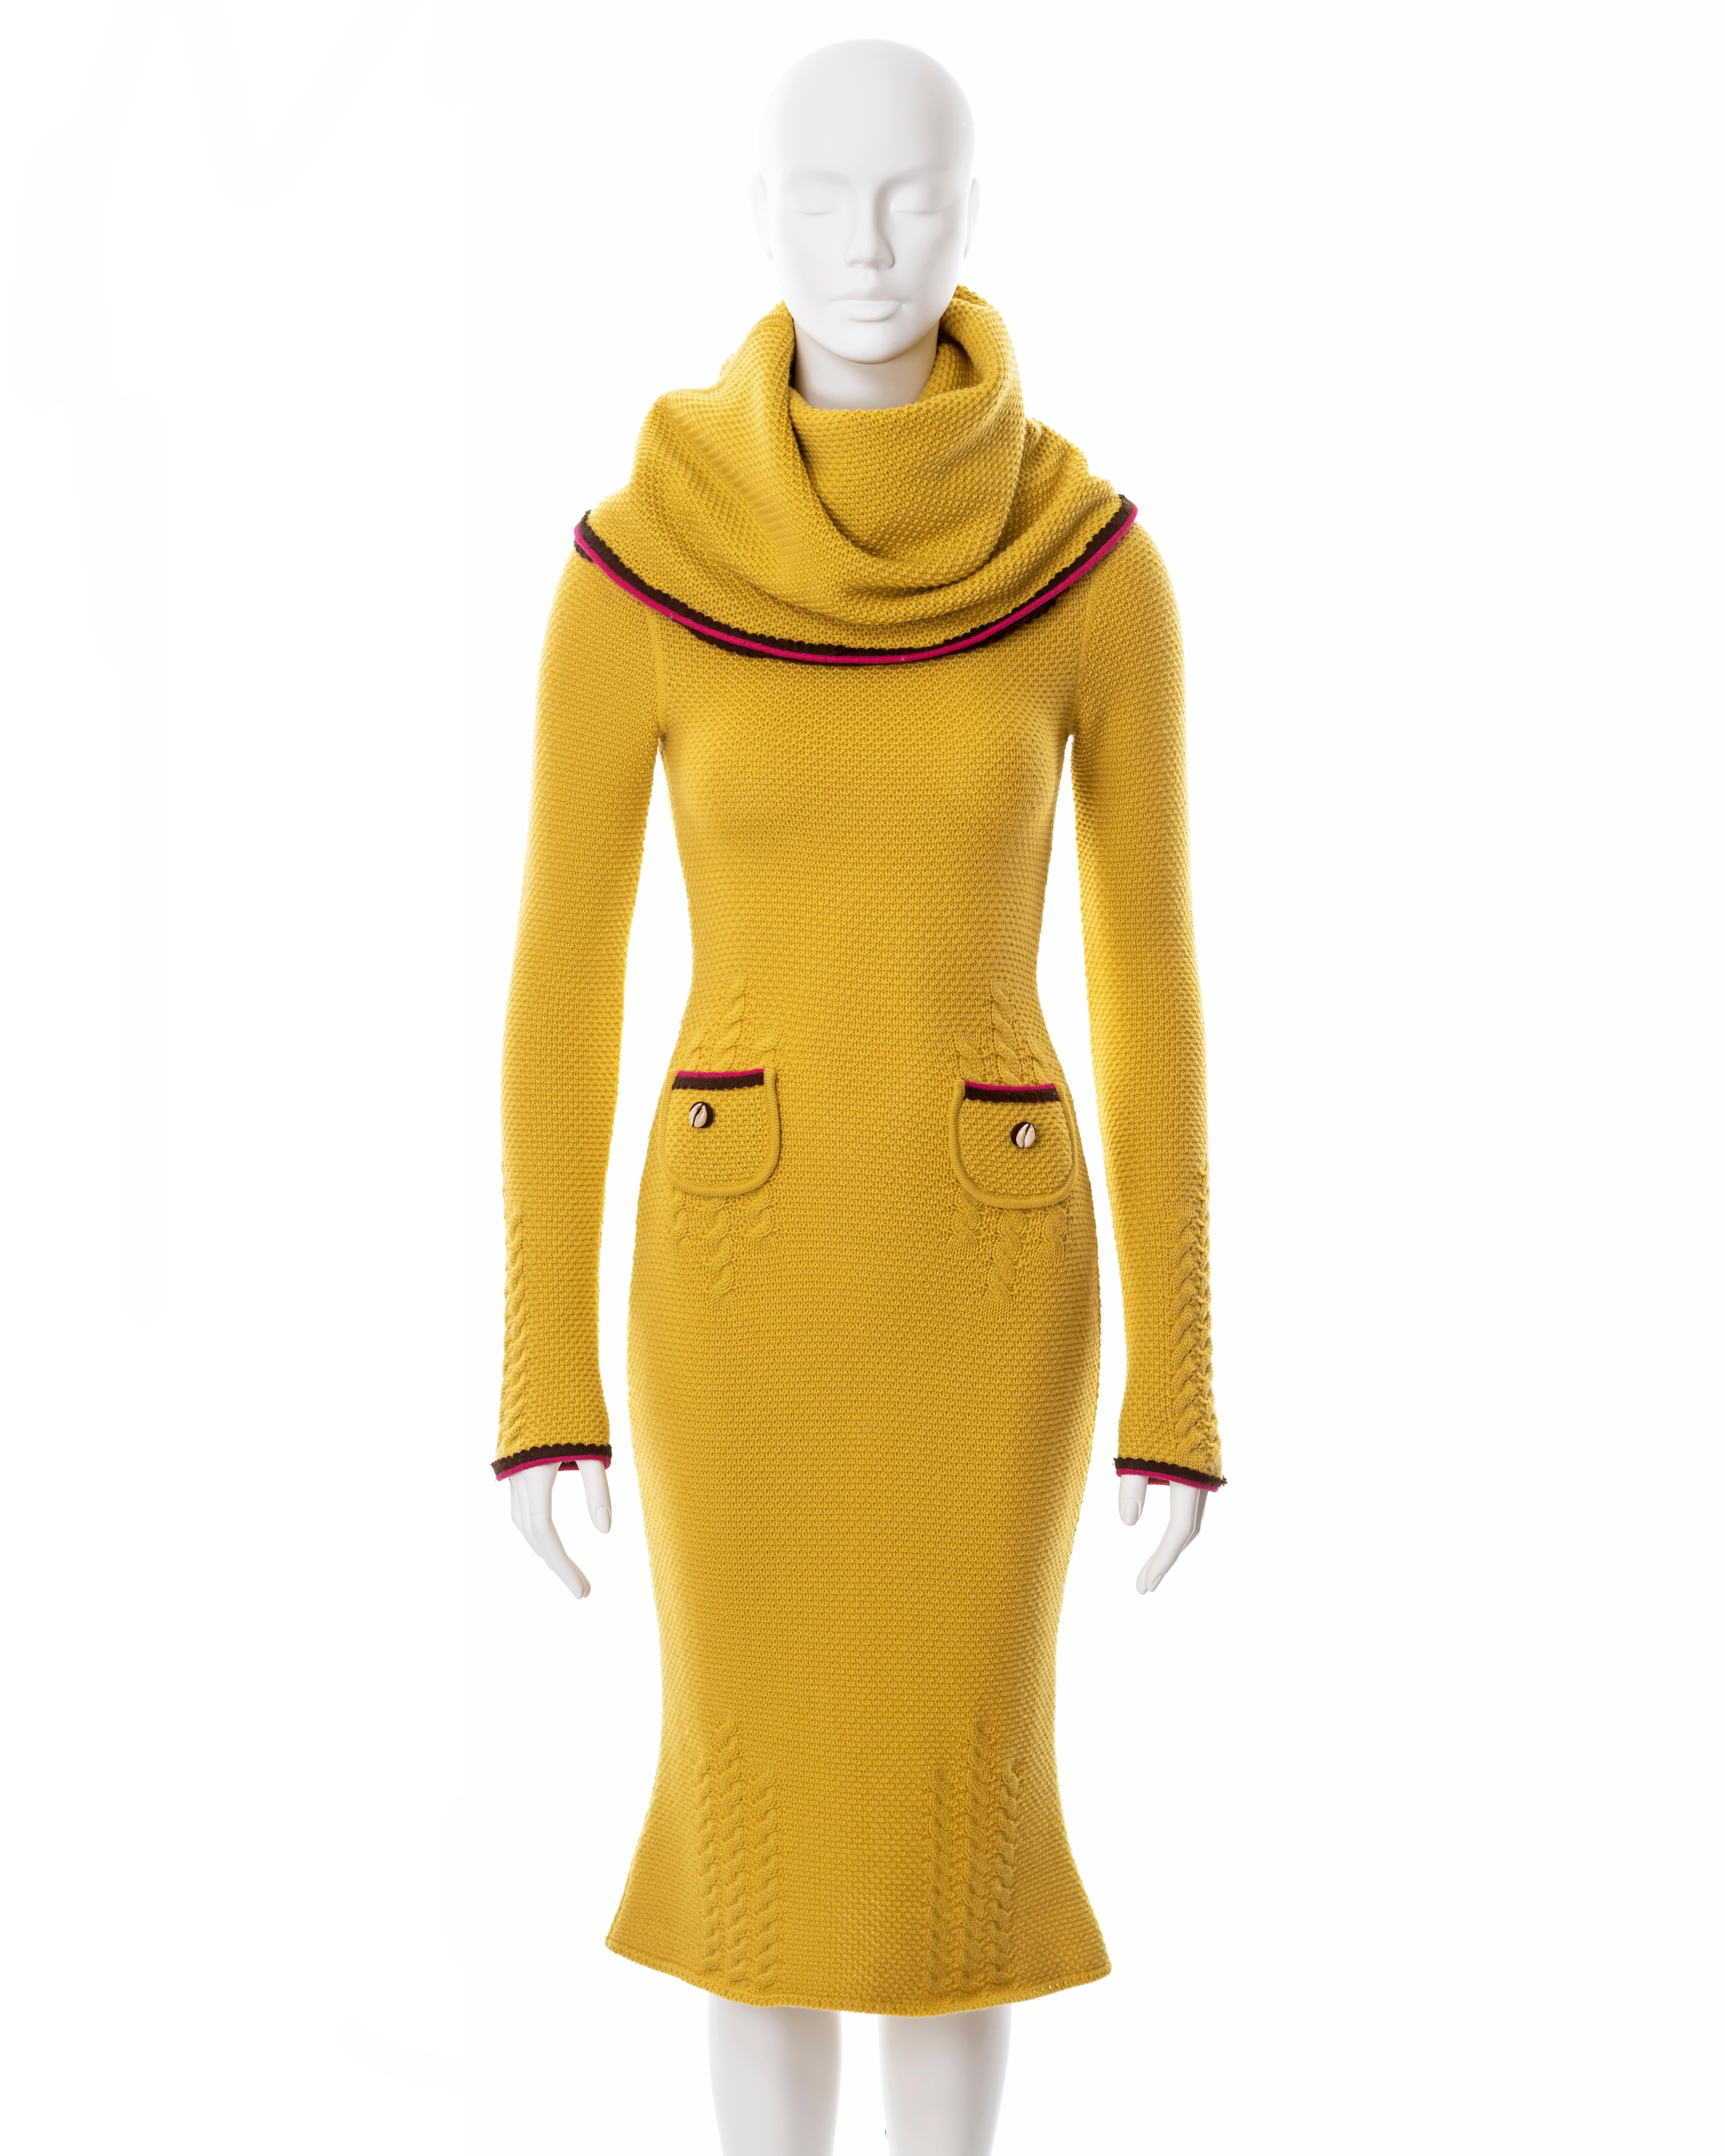 ▪ John Galliano yellow waffle-knit long sleeve dress
▪ Sold by One of a Kind Archive
▪ Fall-Winter 1999
▪ Outsized turtleneck doubles as a hood
▪ Waffle-knit and cable-knit combination  
▪ Burgundy and pink felt scalloped-edged trim
▪ 2 small front